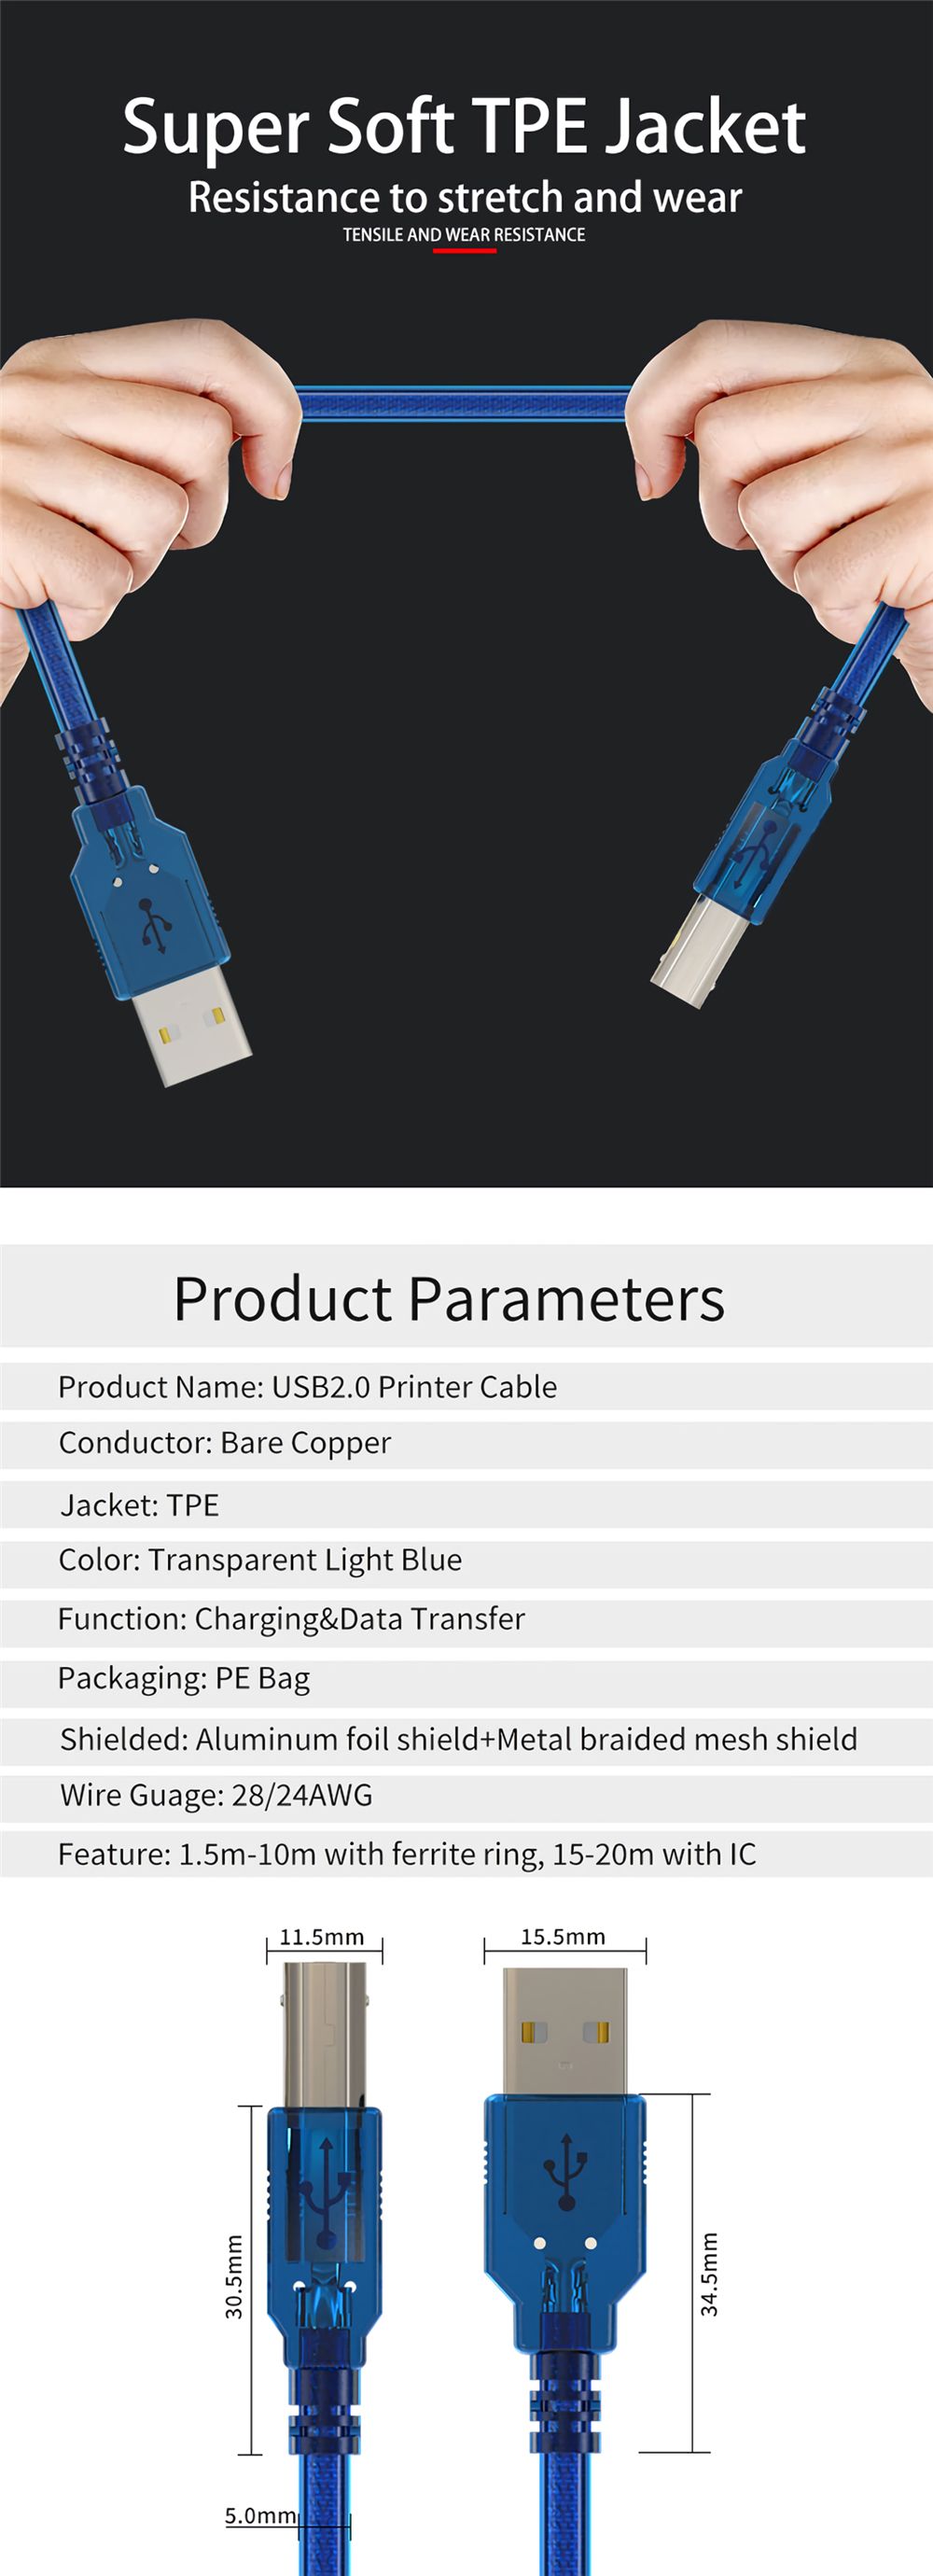 GCX-USB20-Printer-Data-Cable-High-Speed-Type-A-to-B-Male-to-Male-Cable-for-Printers-Scanners-Compute-1690188